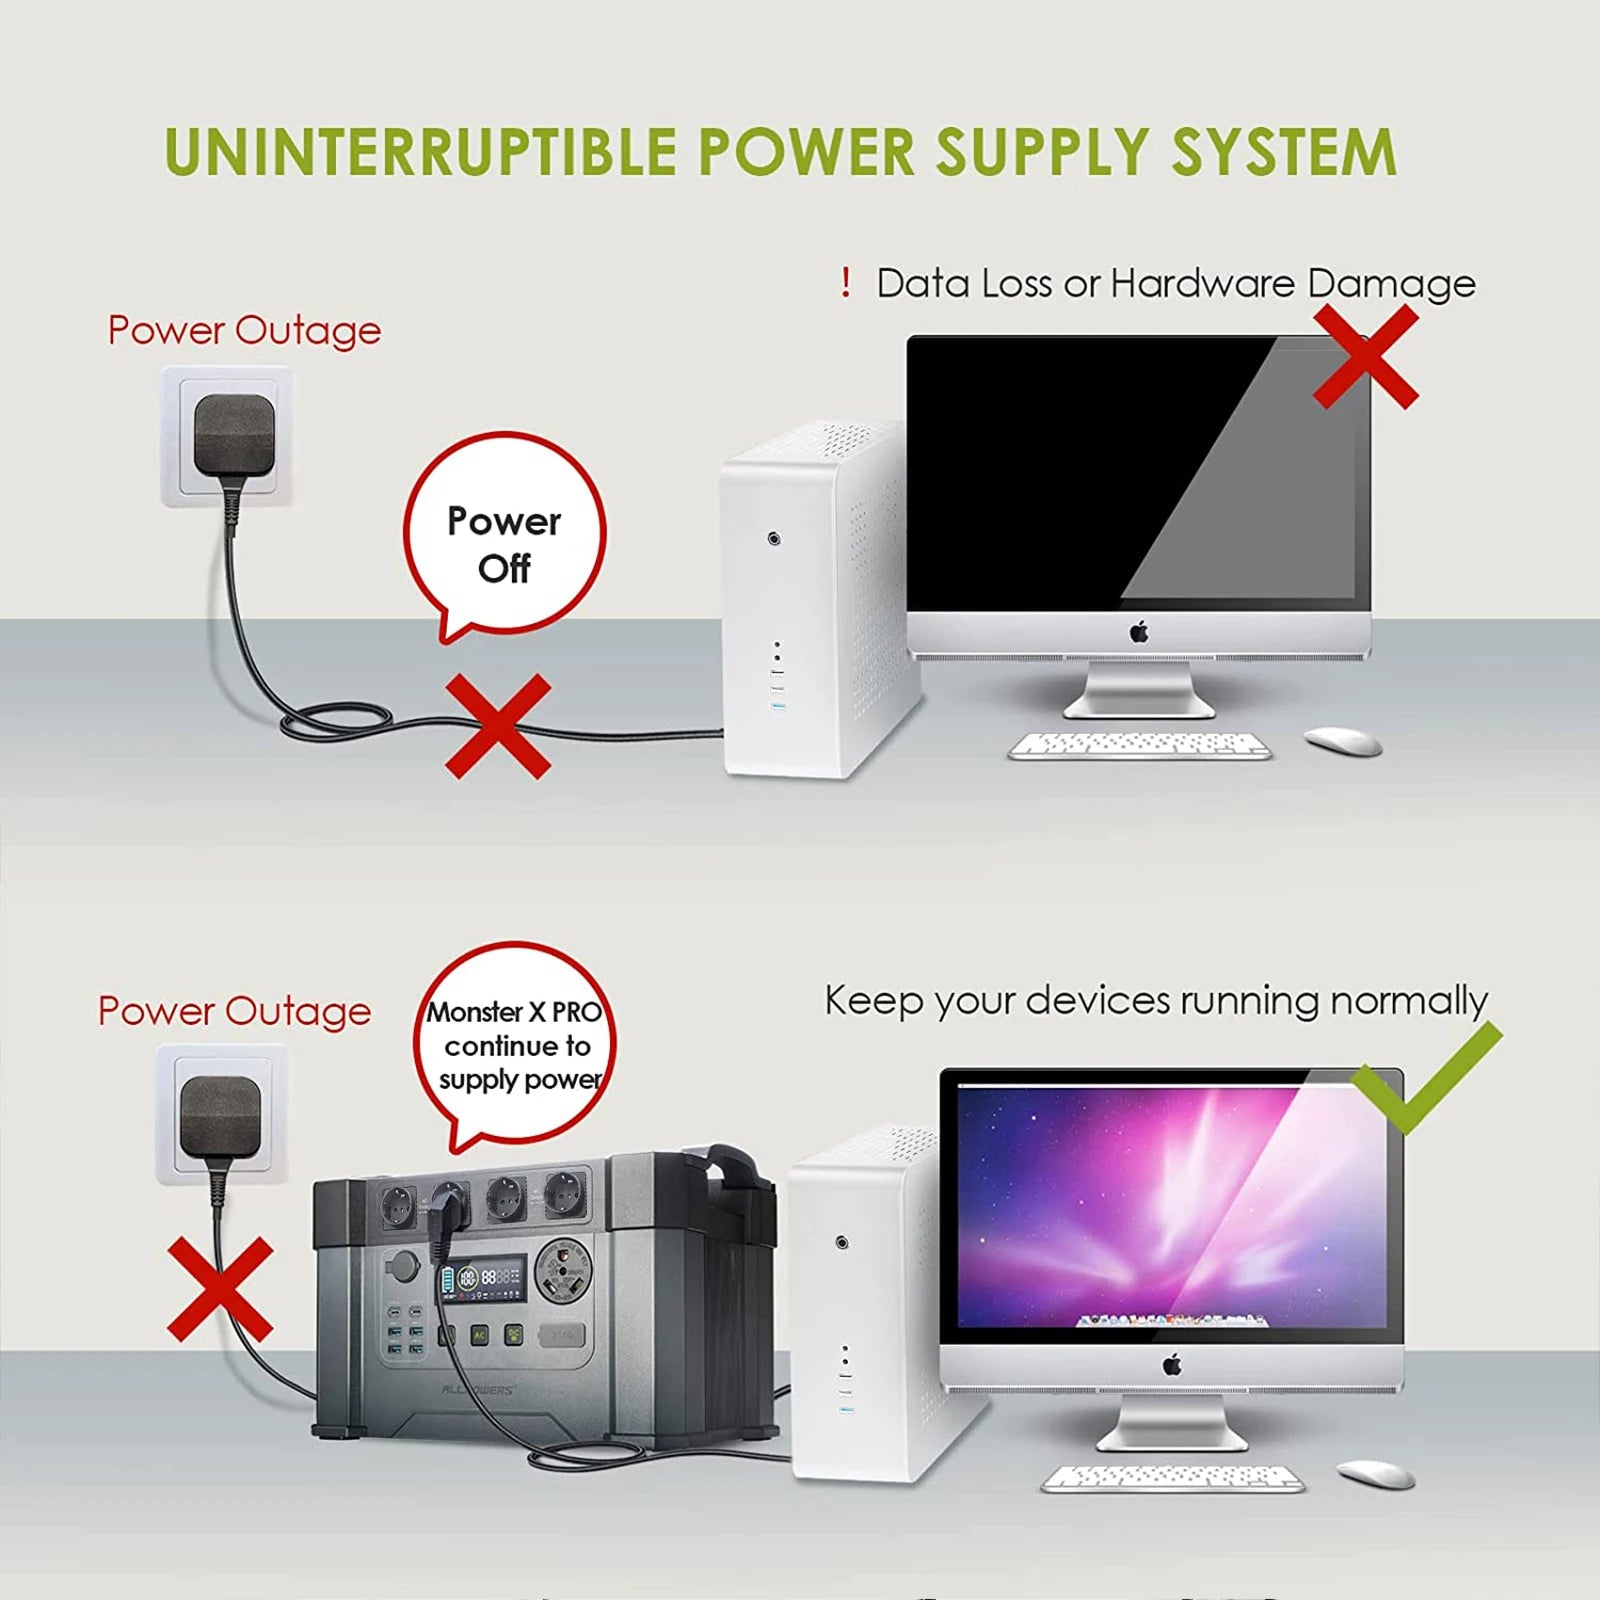 Reliable backup power system prevents data loss and hardware damage during outages.